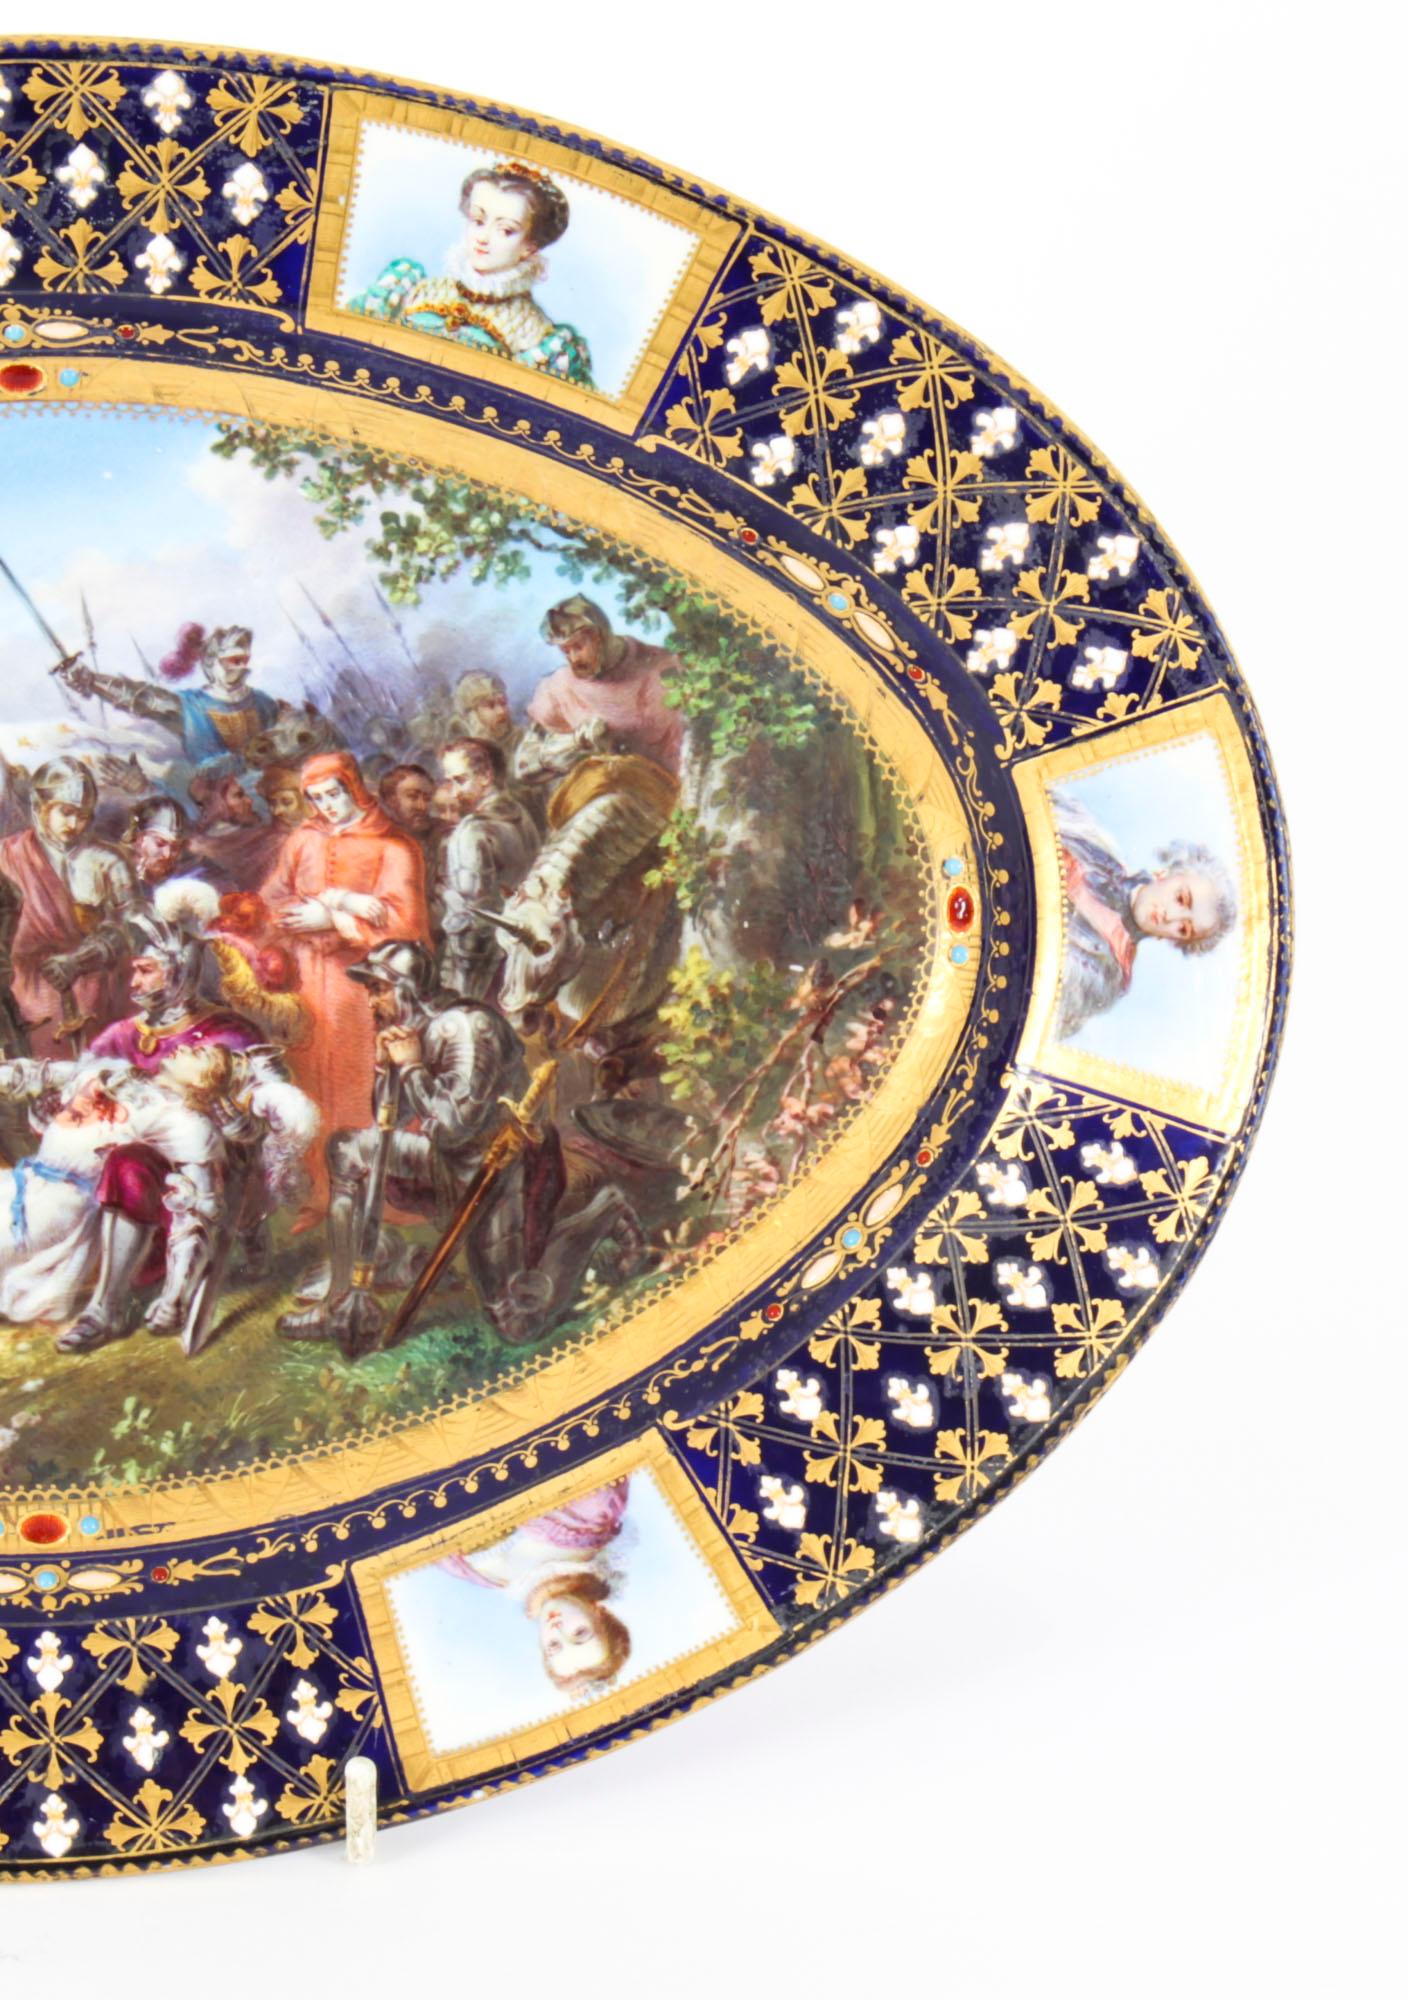 Antique French Sevres Oval Porcelain Dish, Late 18th Century For Sale 2